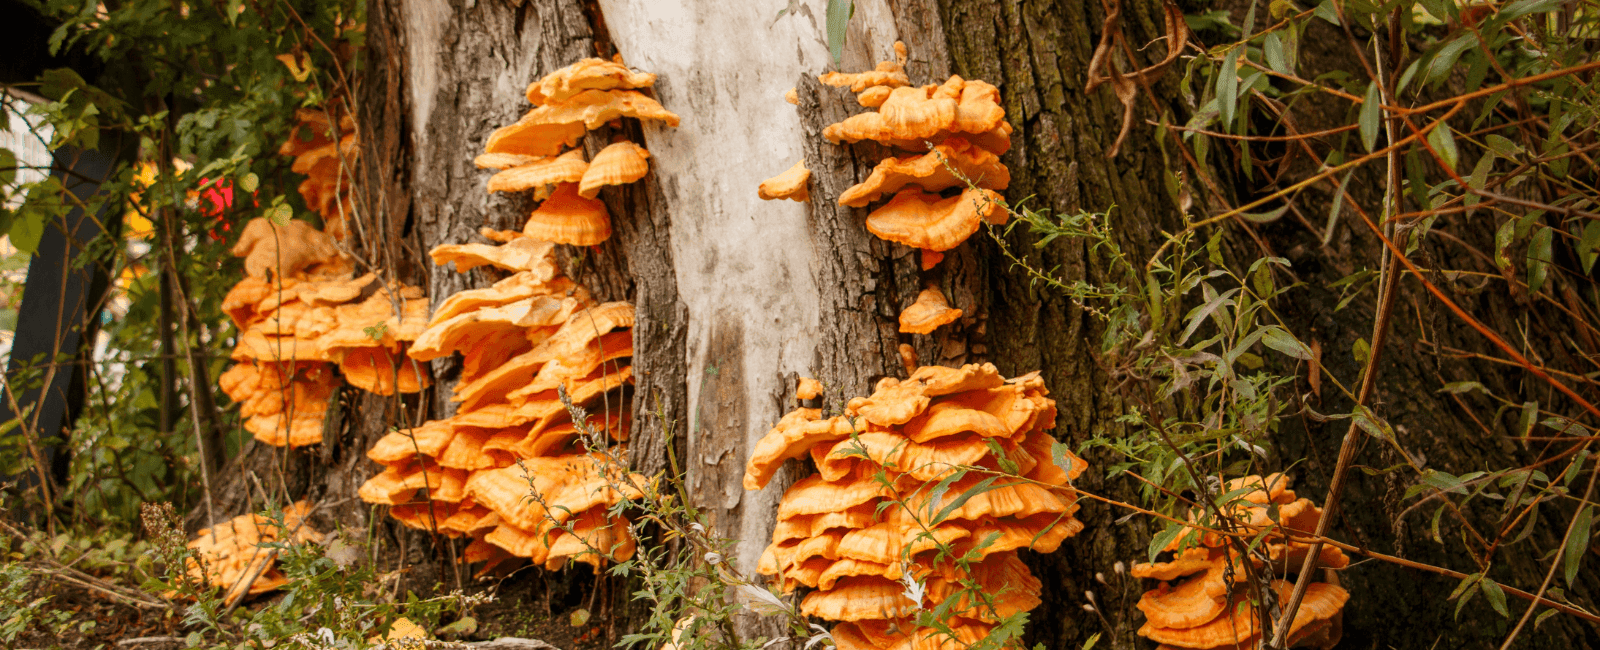 A Guide to Tree-Dwelling Mushrooms: Most Common Kinds and Their Ecological Role